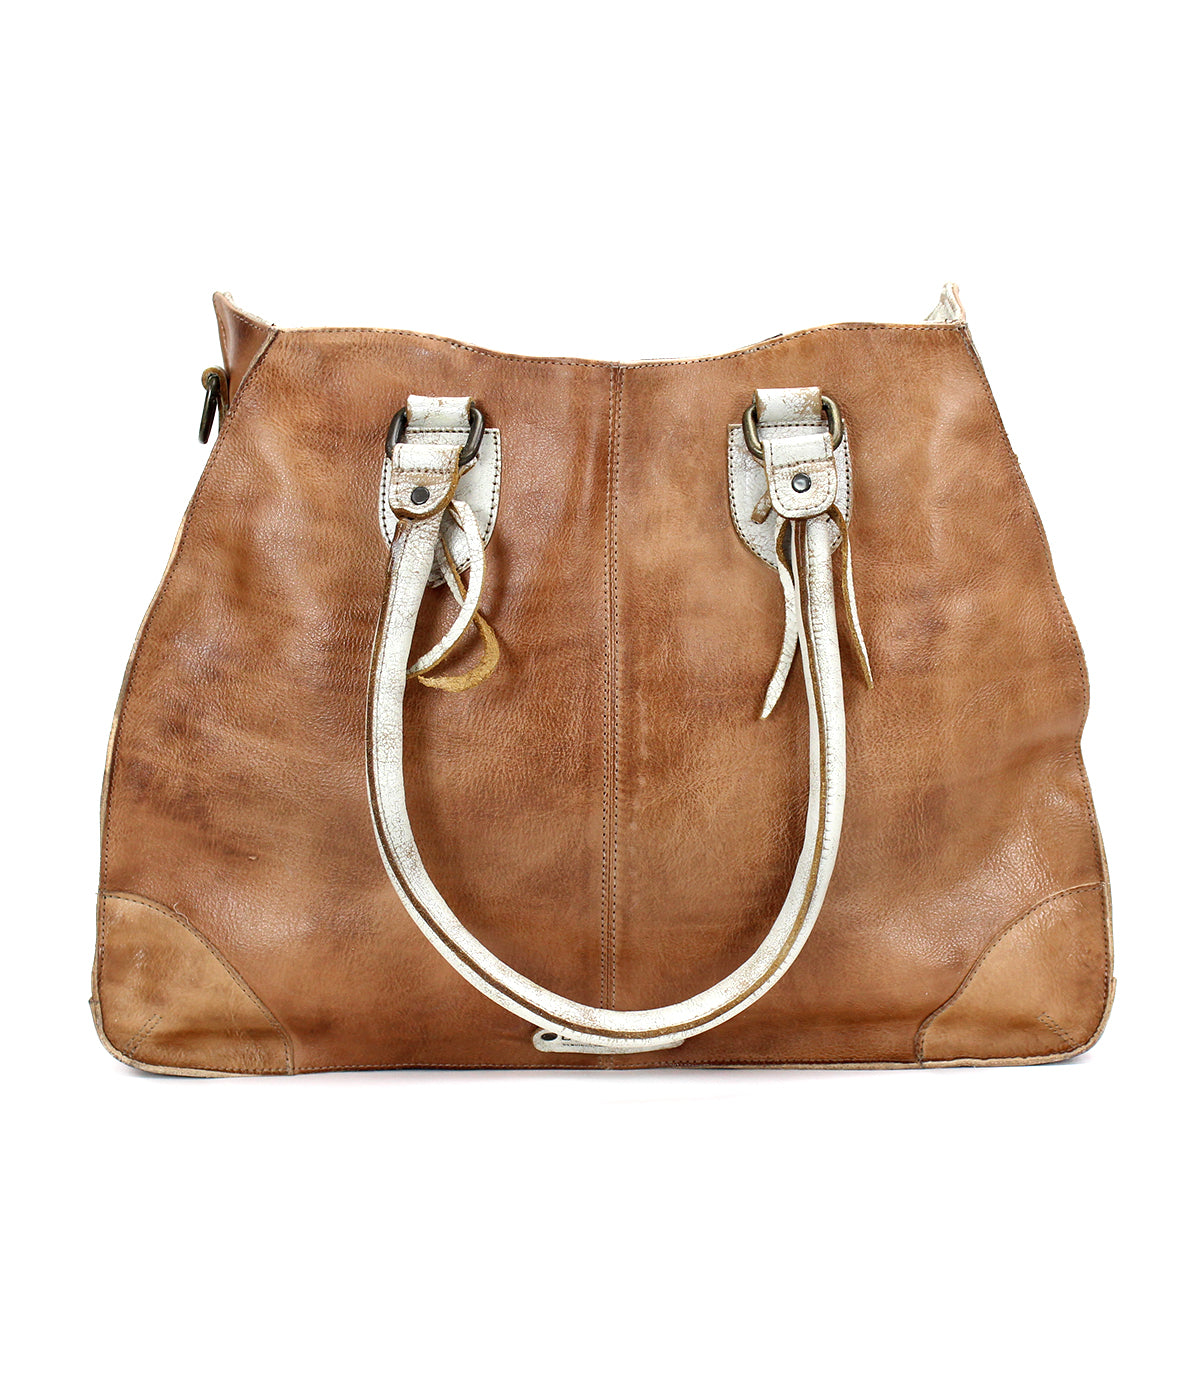 A Bruna handbag by Bed Stu, made of brown leather with shoulder straps and a zipper.